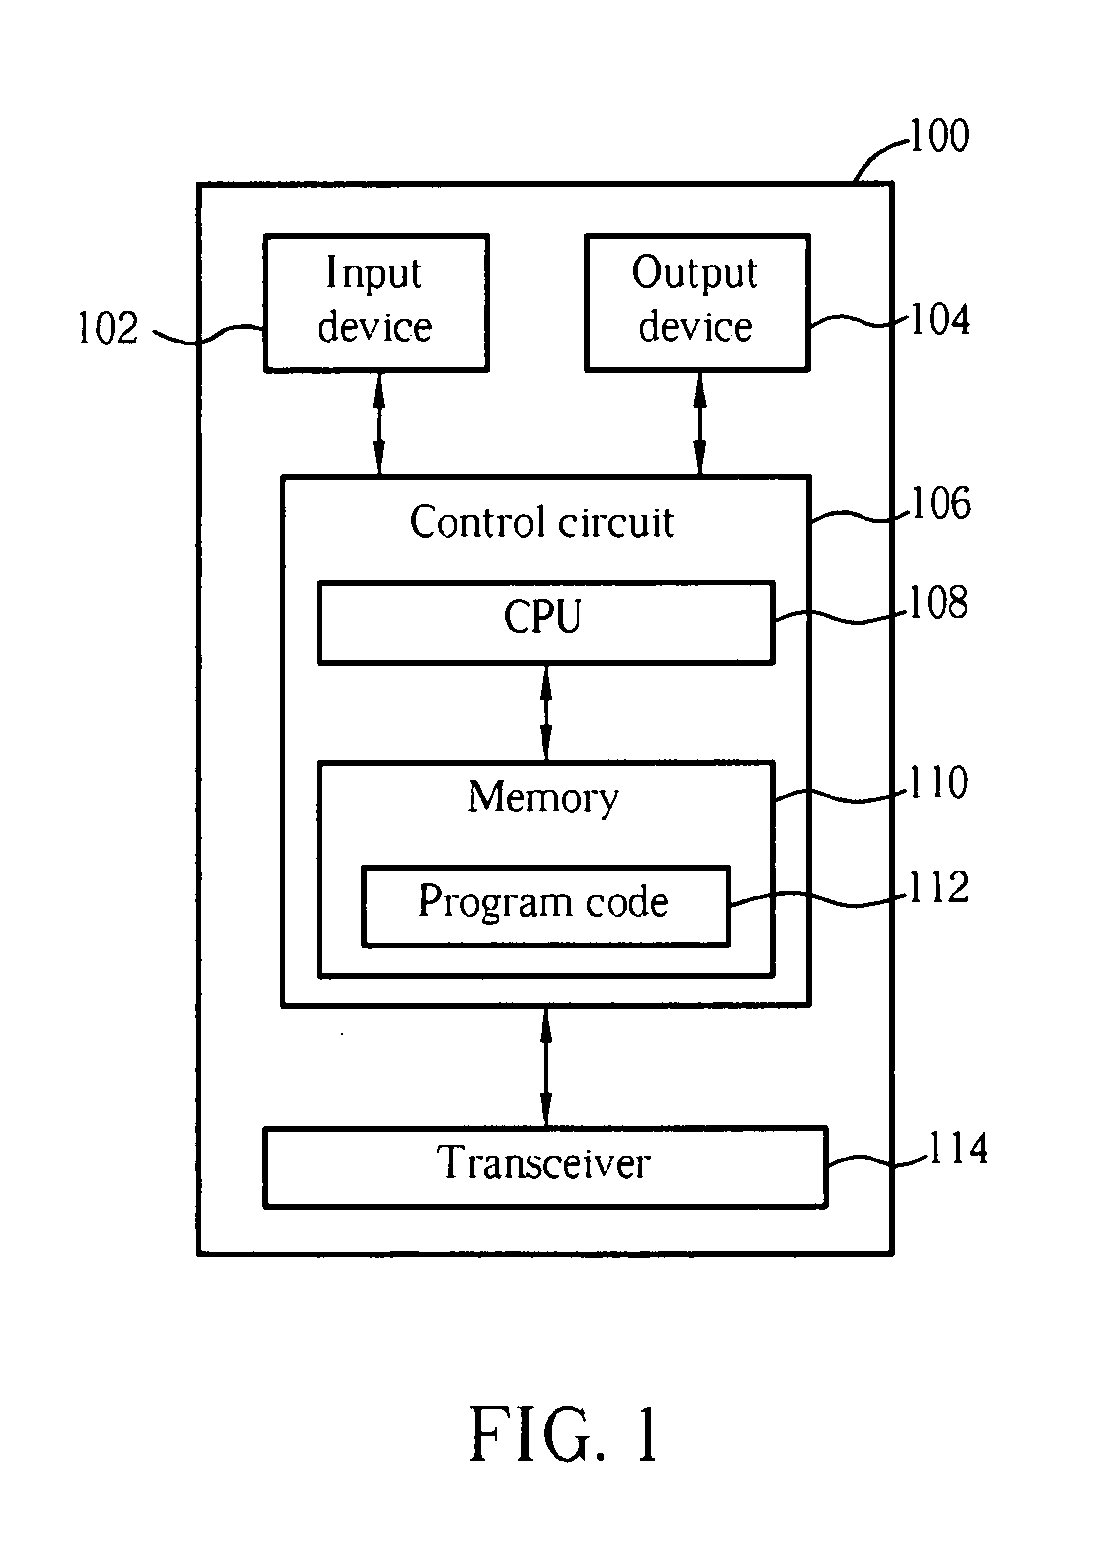 Method and apparatus for performing security error recovery in a wireless communications system